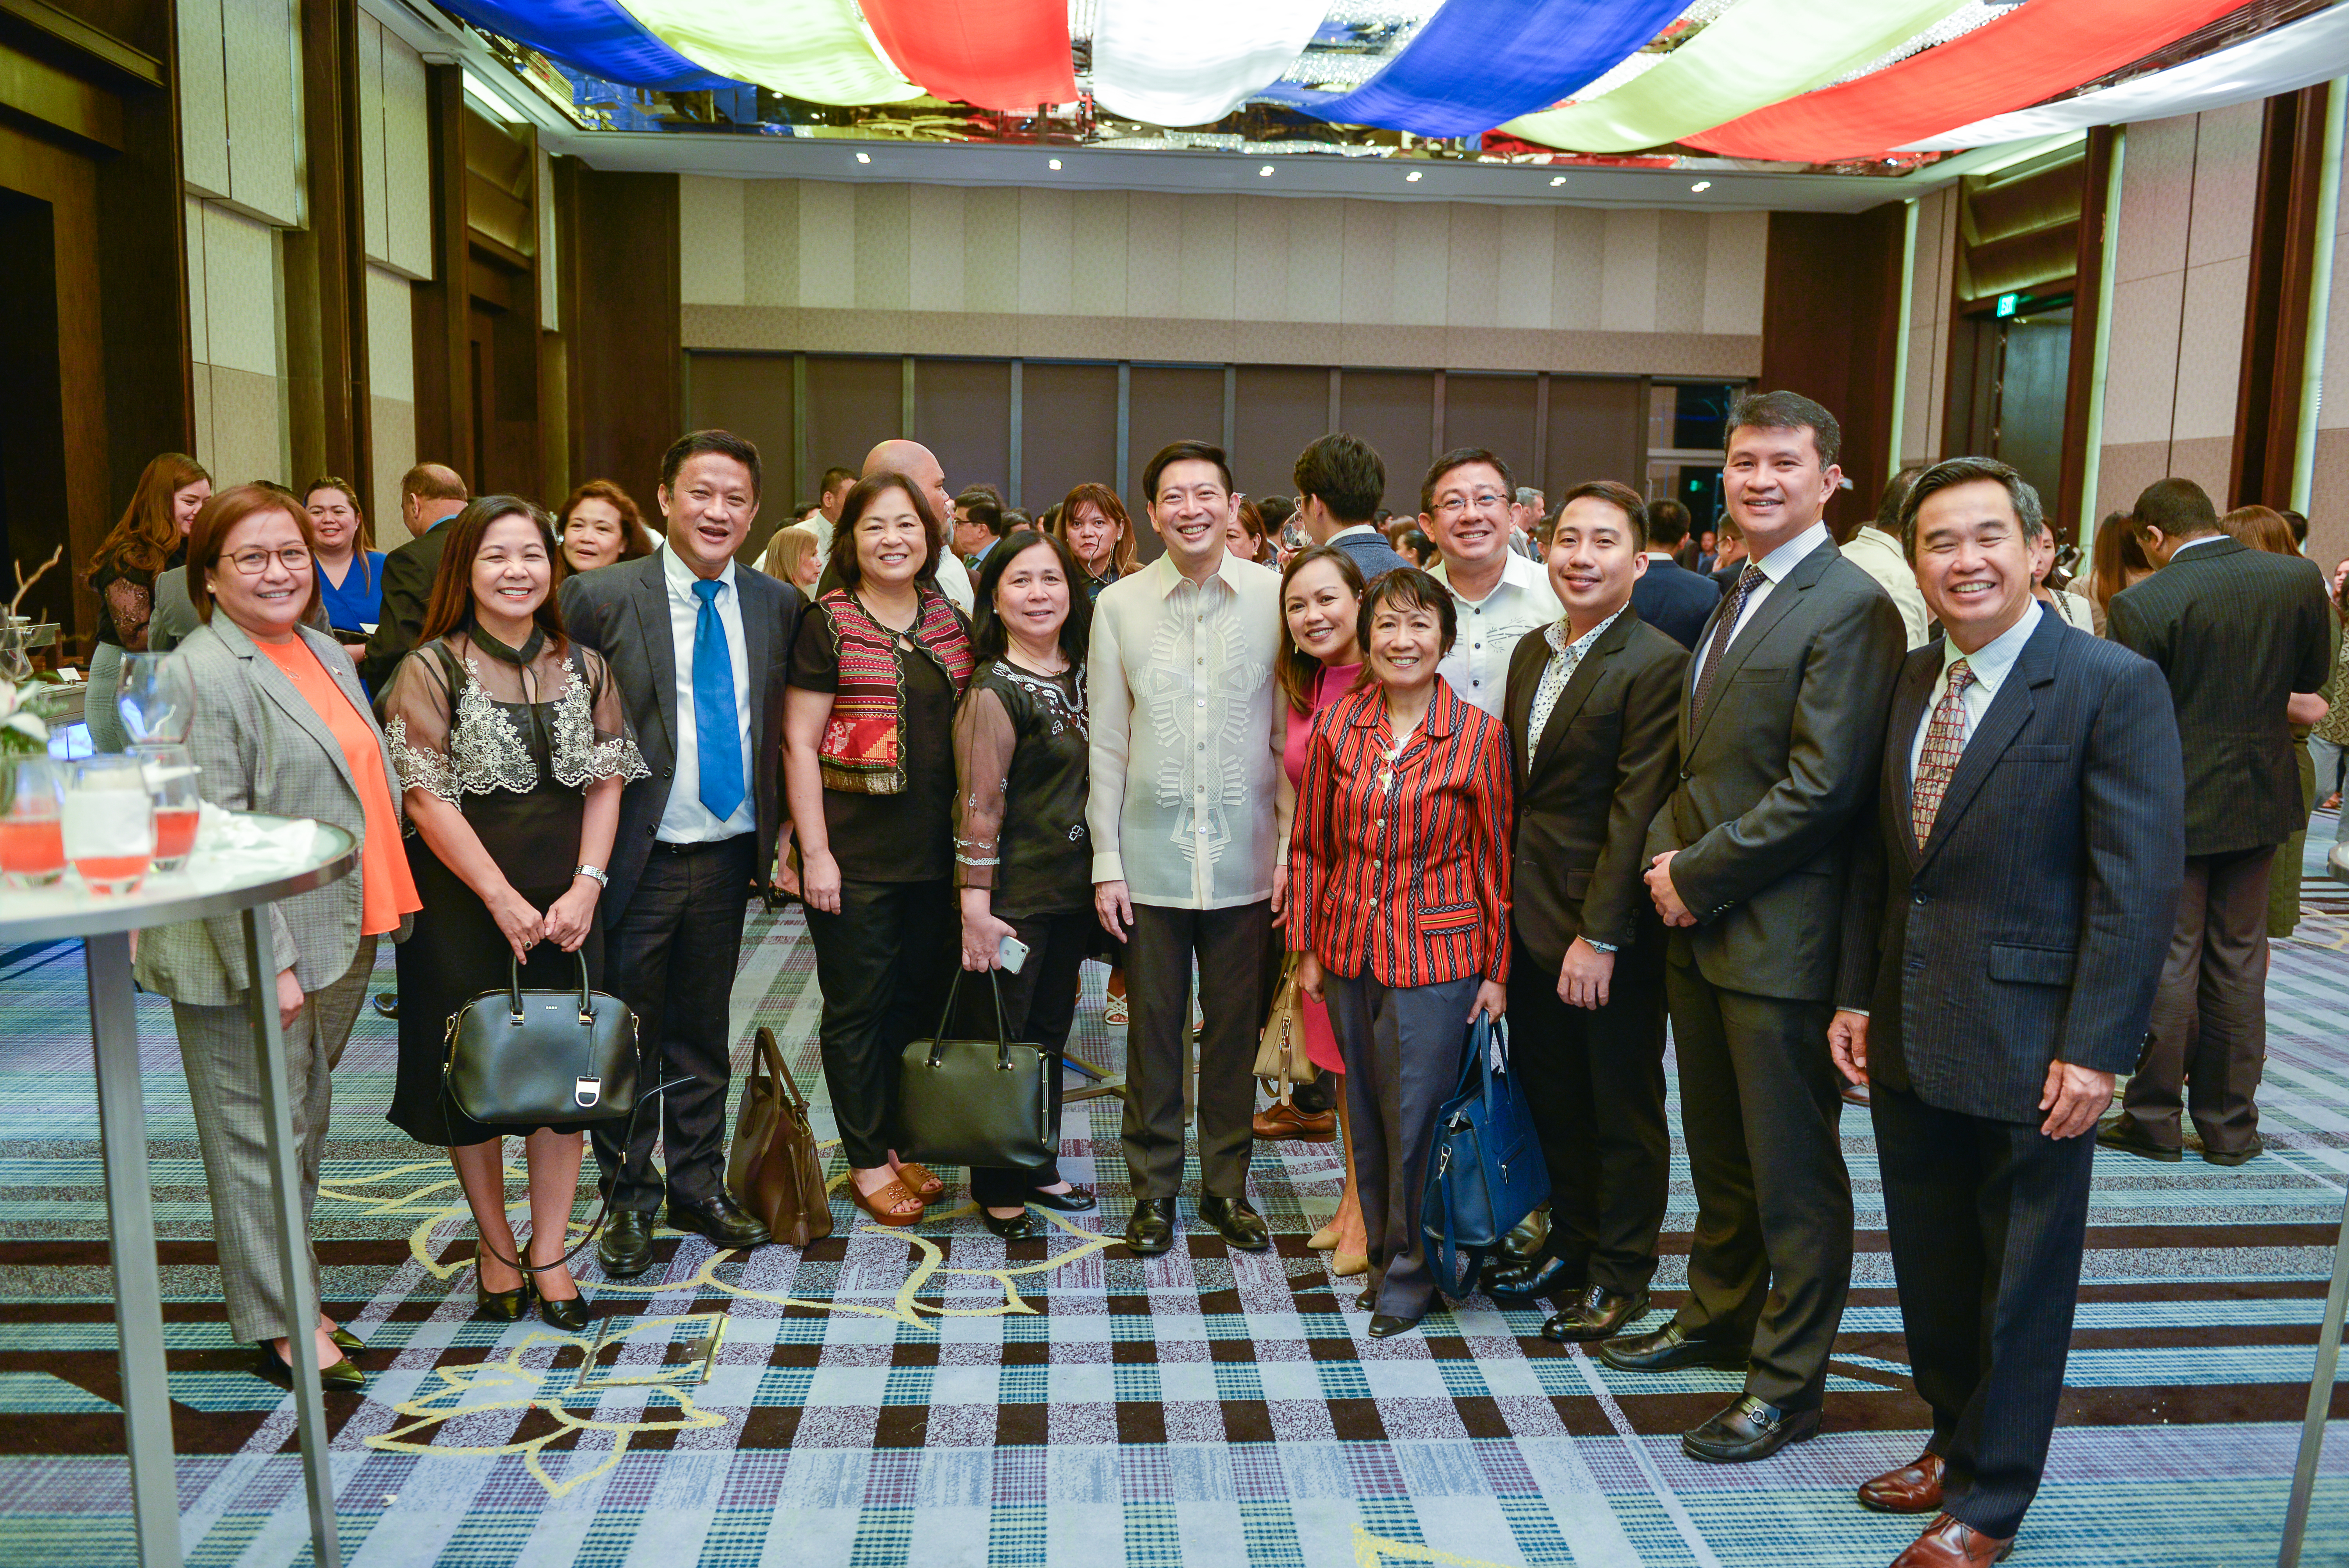 Members of the Philippine government, the diplomatic and consular corps, as well as friends from the media and business communities.